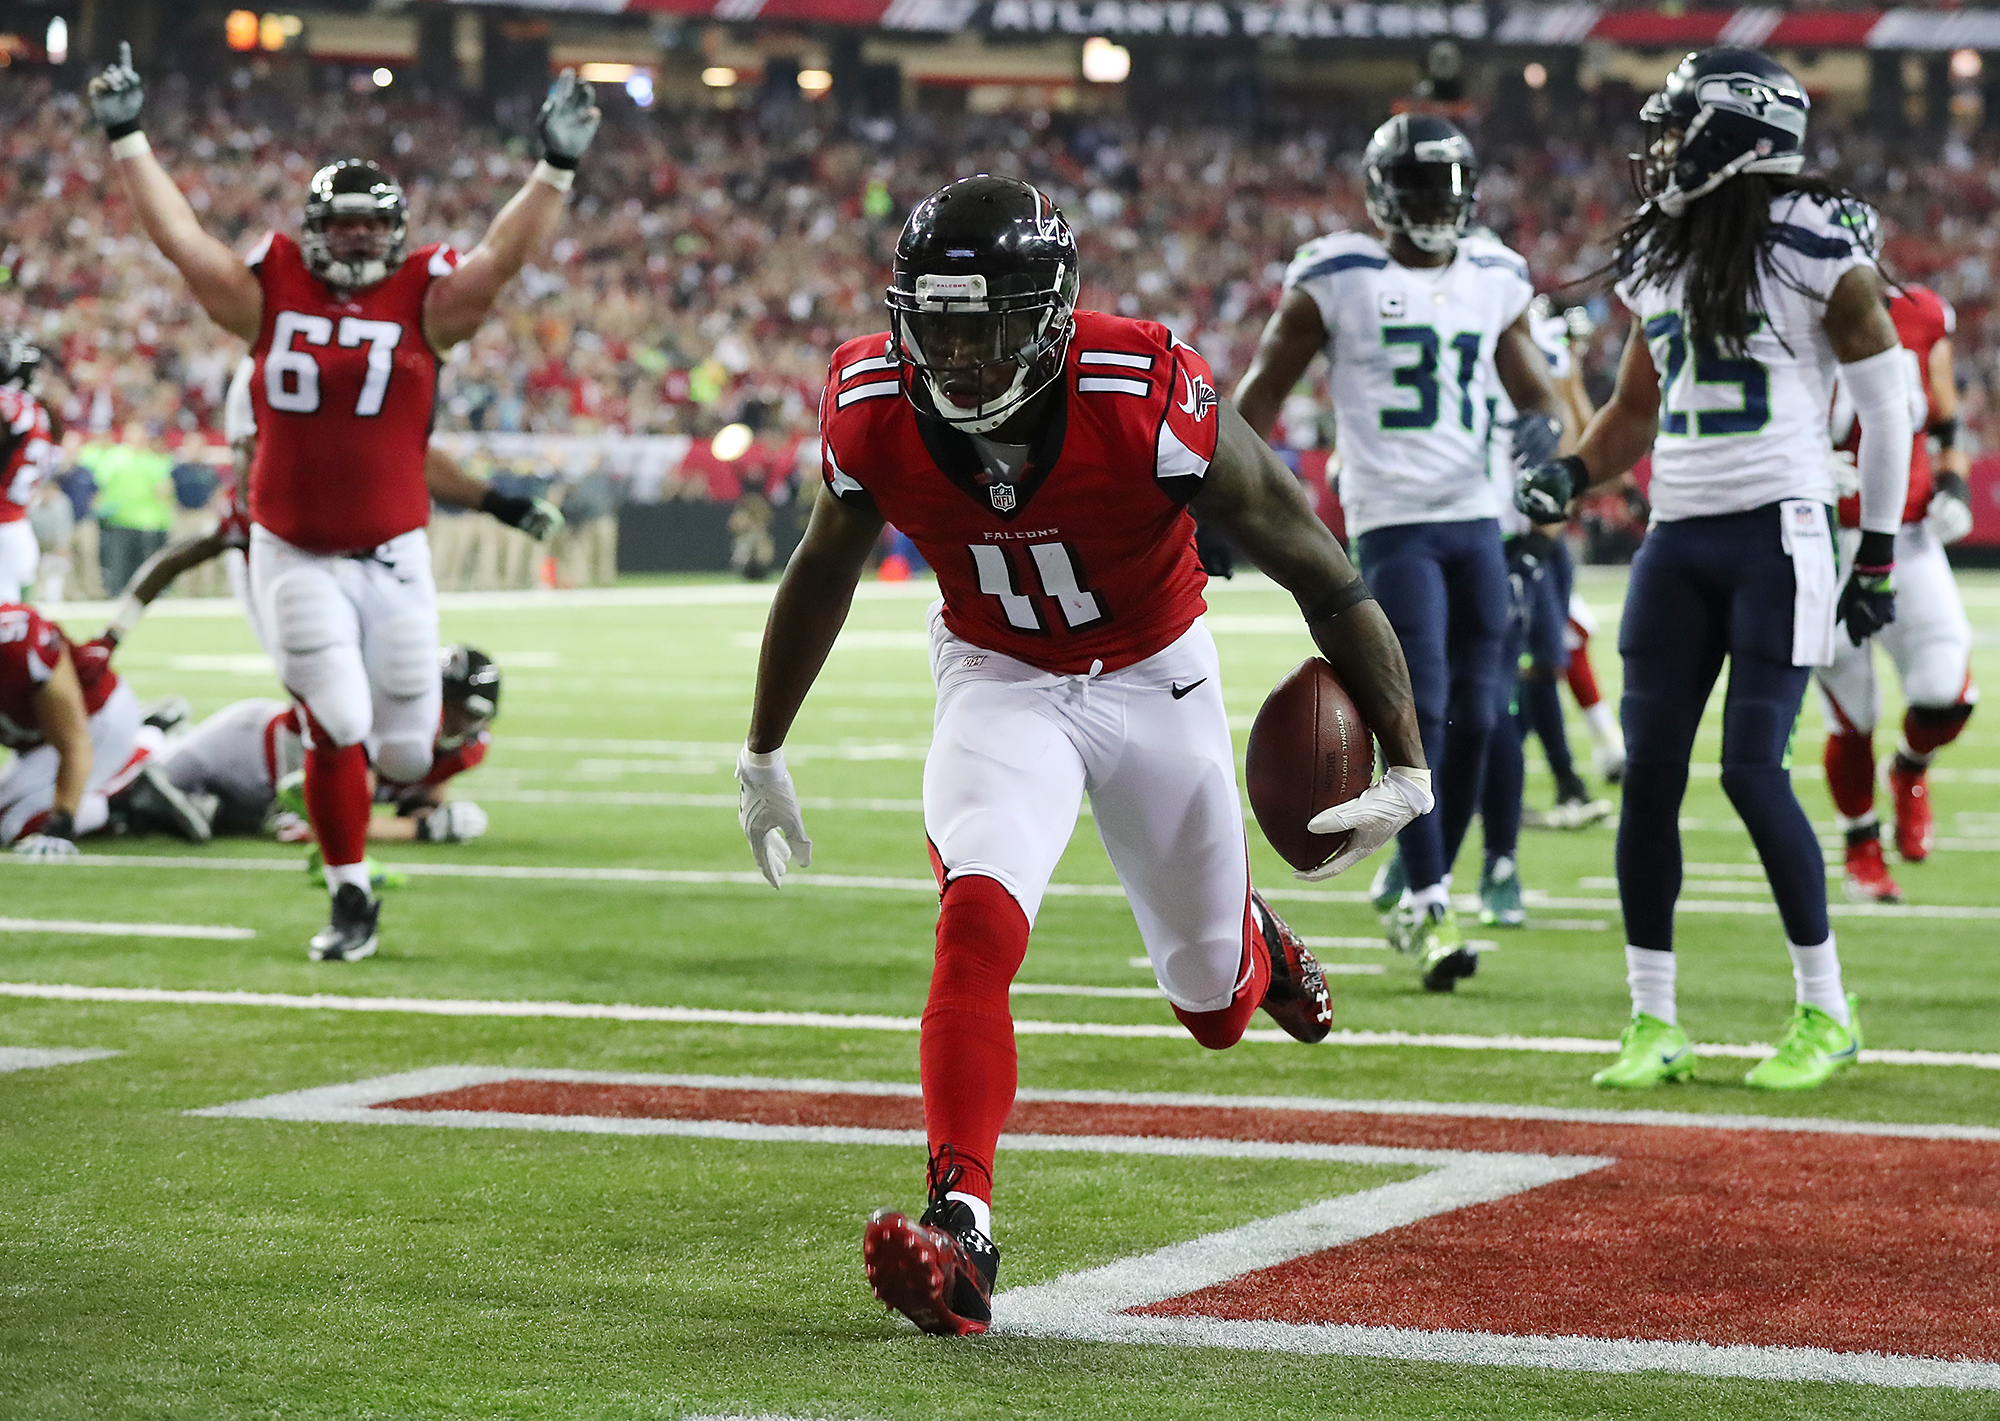 Falcons have been transformed into team Atlanta has waited for